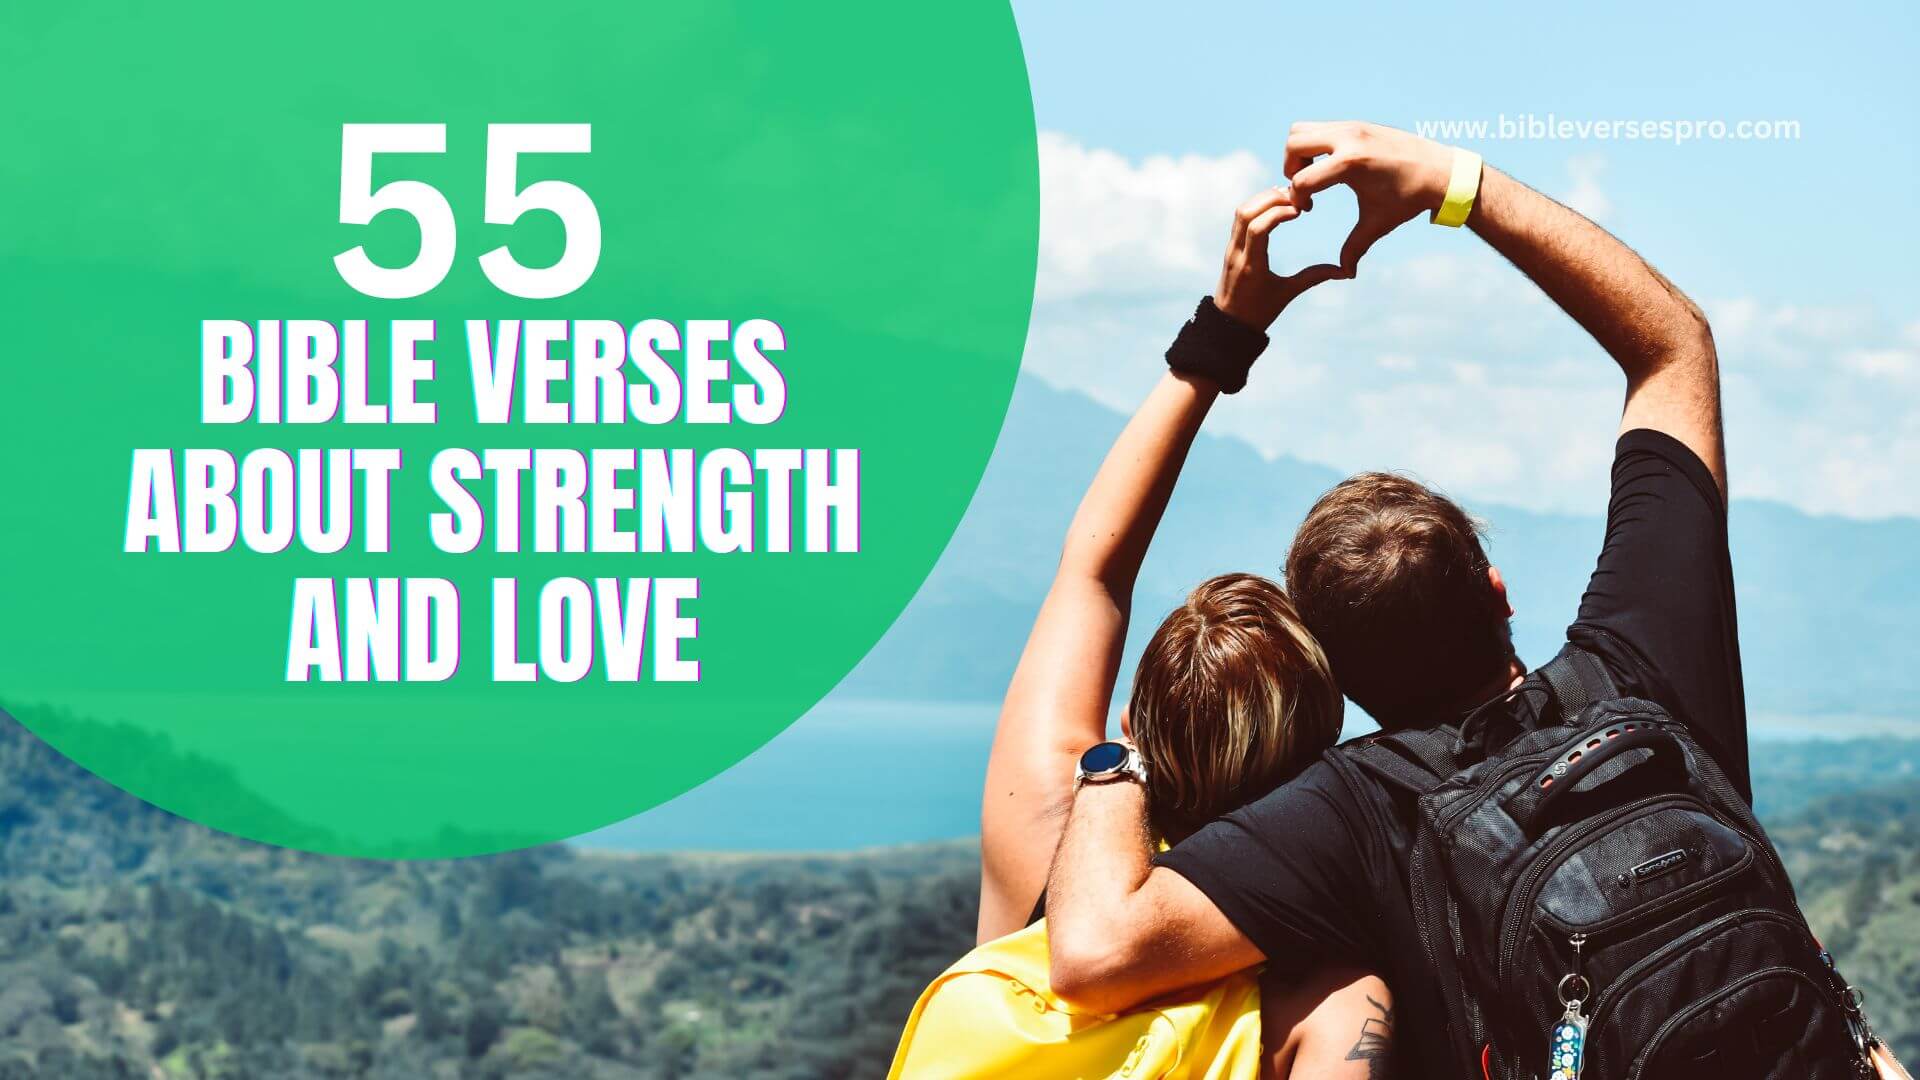 BIBLE VERSES ABOUT STRENGTH AND LOVE